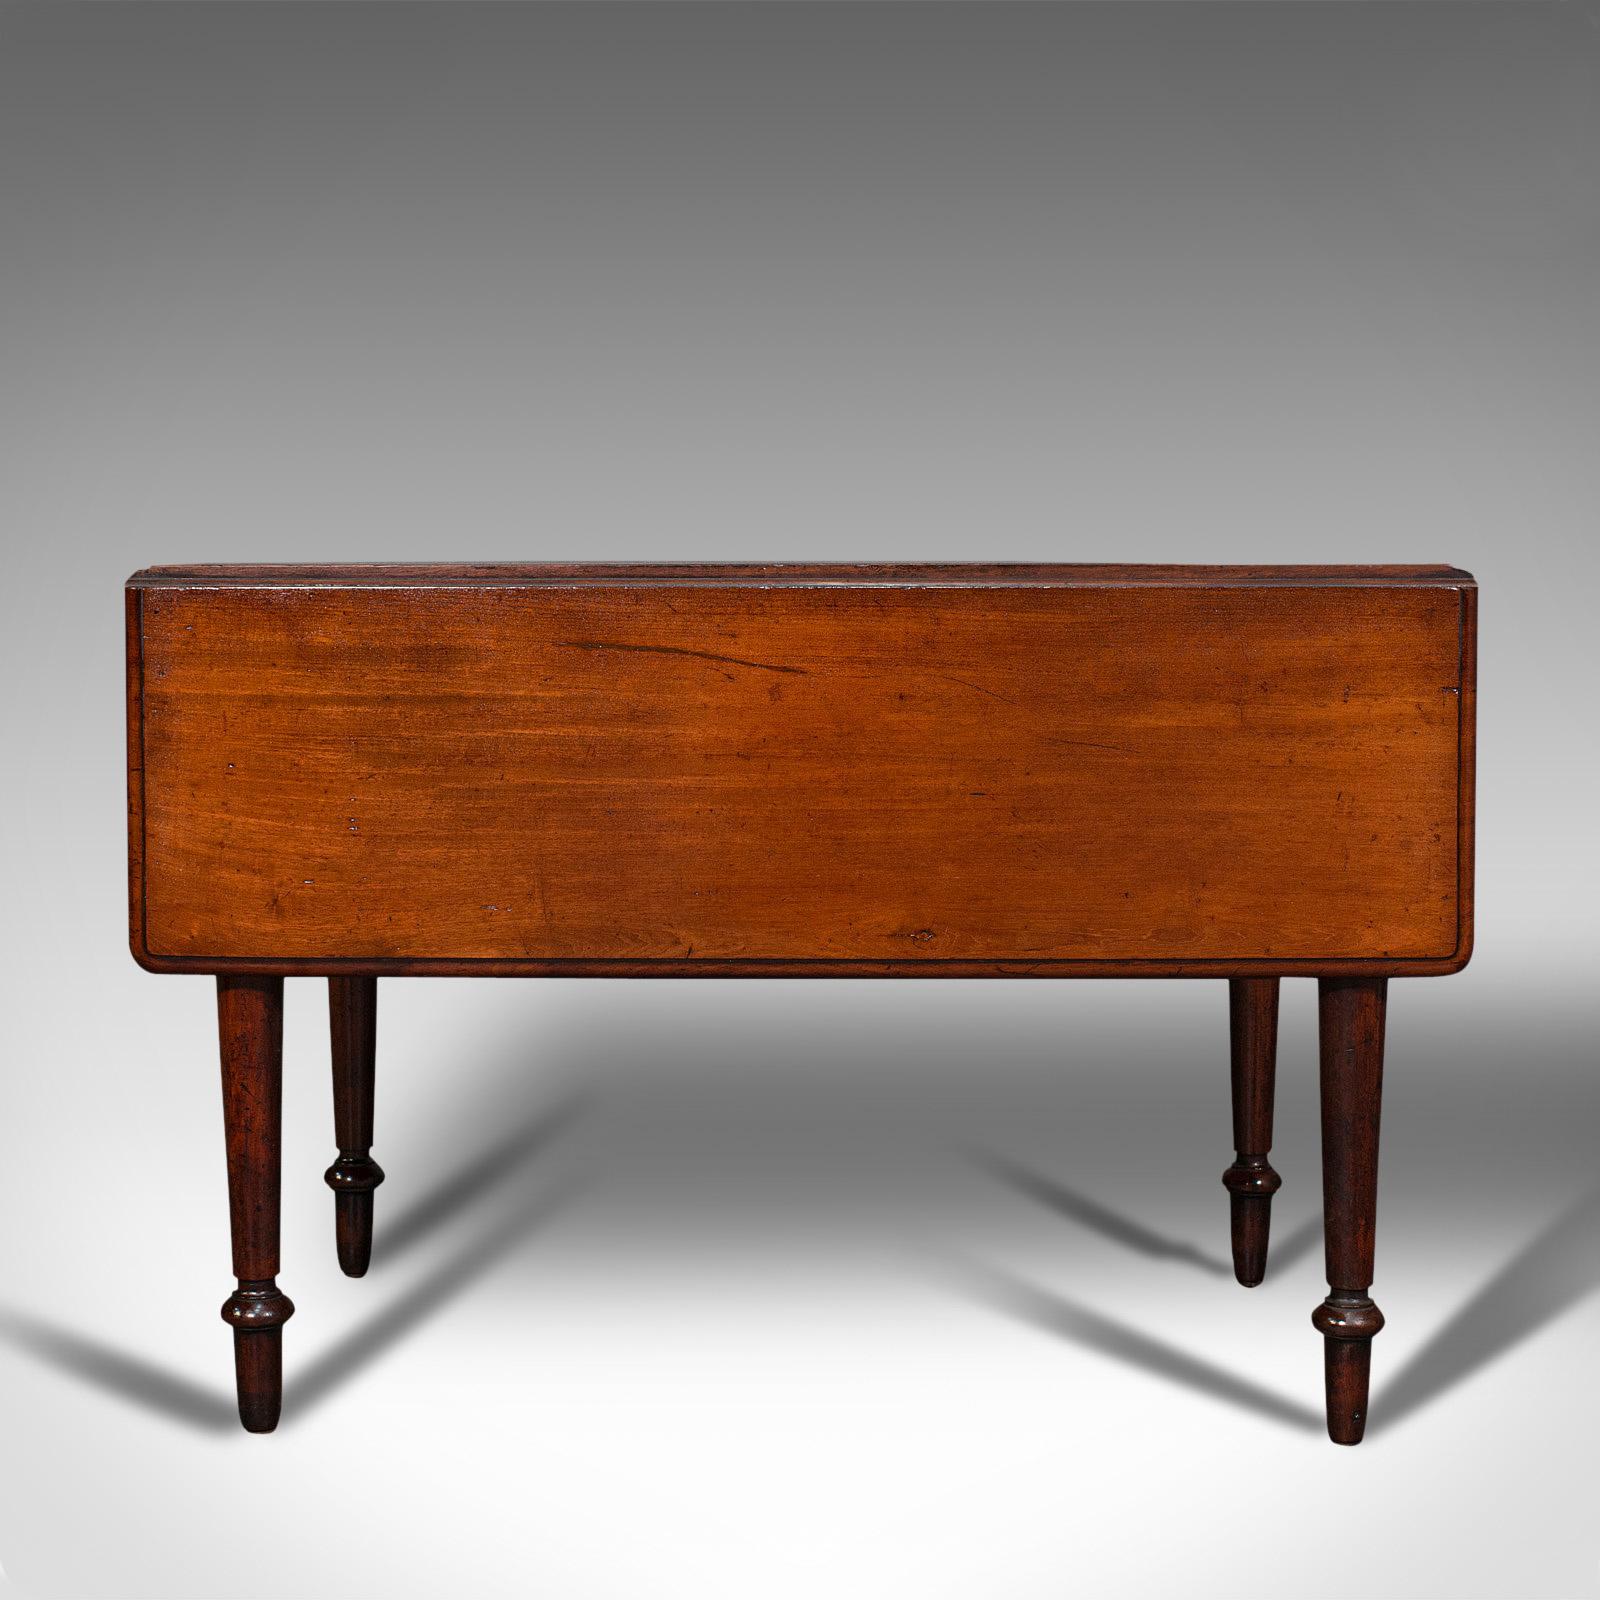 Antique Pembroke Table, English, Mahogany, Extending, Dining, Regency, C.1820 In Good Condition For Sale In Hele, Devon, GB